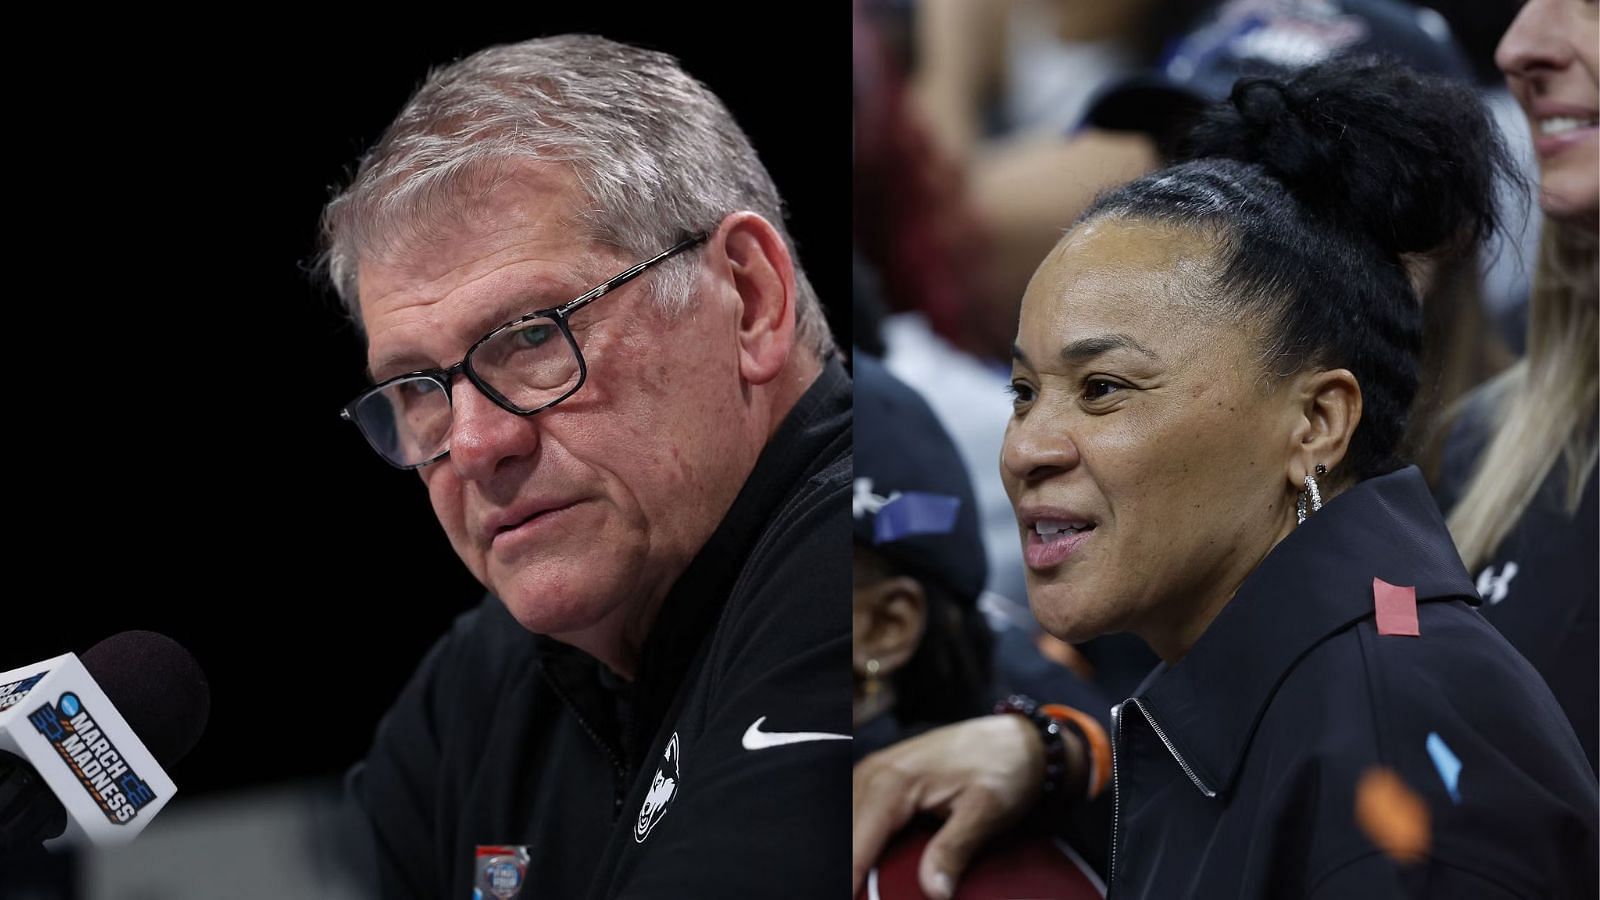 Geno Auriemma has coached six teams that had perfect seasons, while Dawn Staley